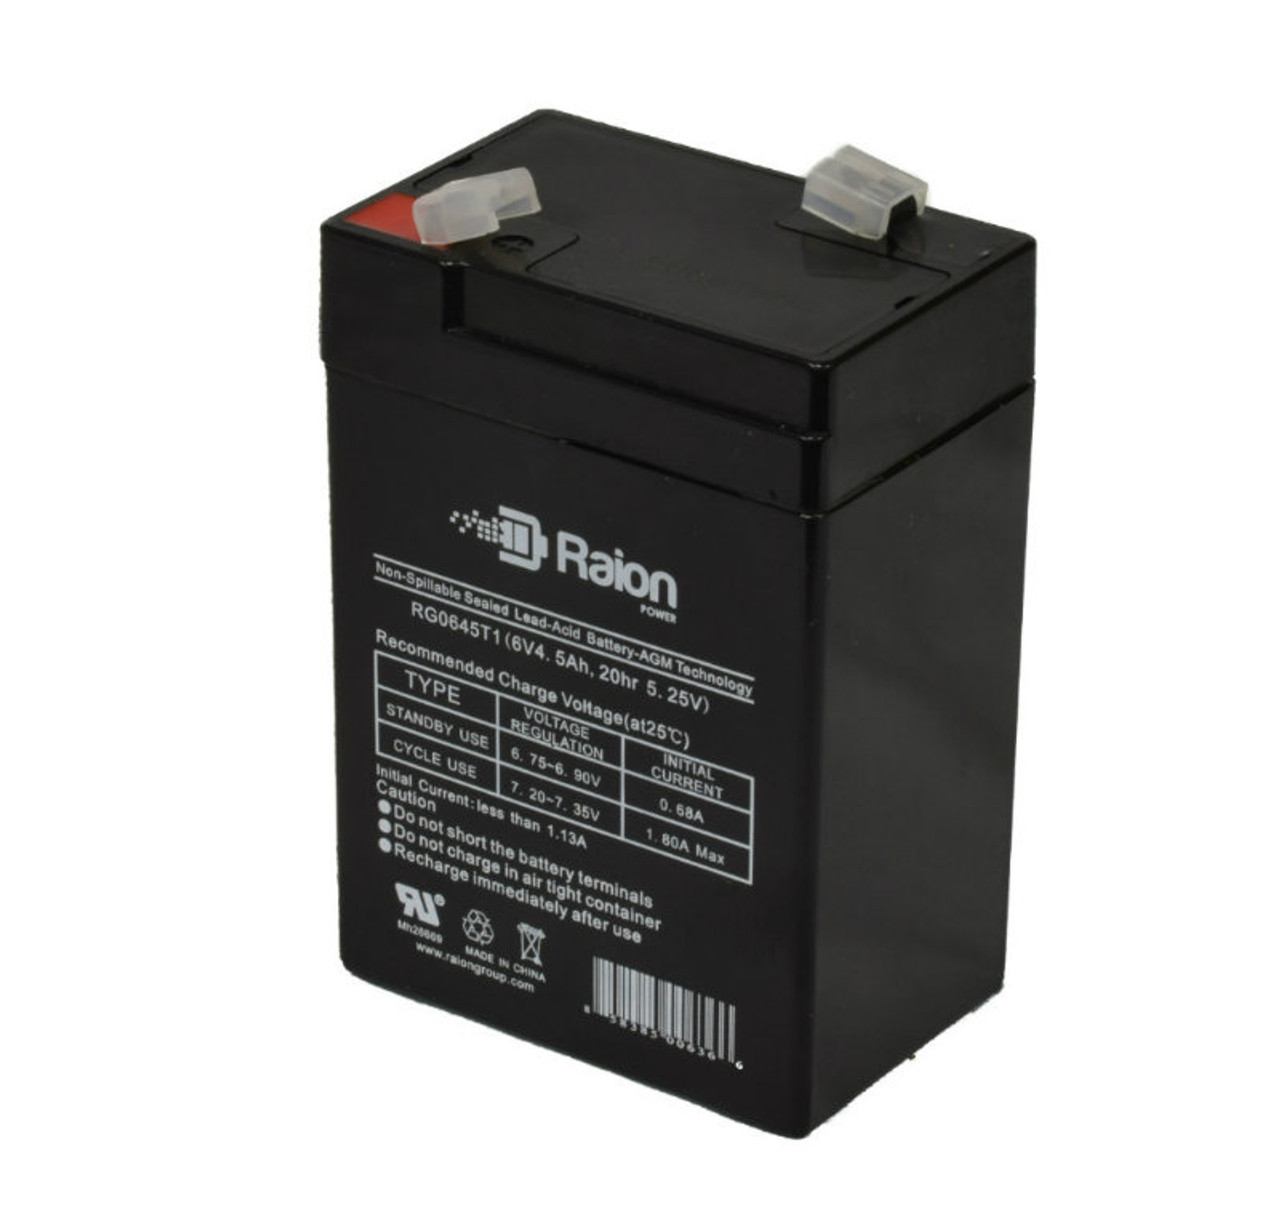 Raion Power RG0645T1 6V 4.5Ah Replacement Battery Cartridge for Cambridge Med Instruments Model 502